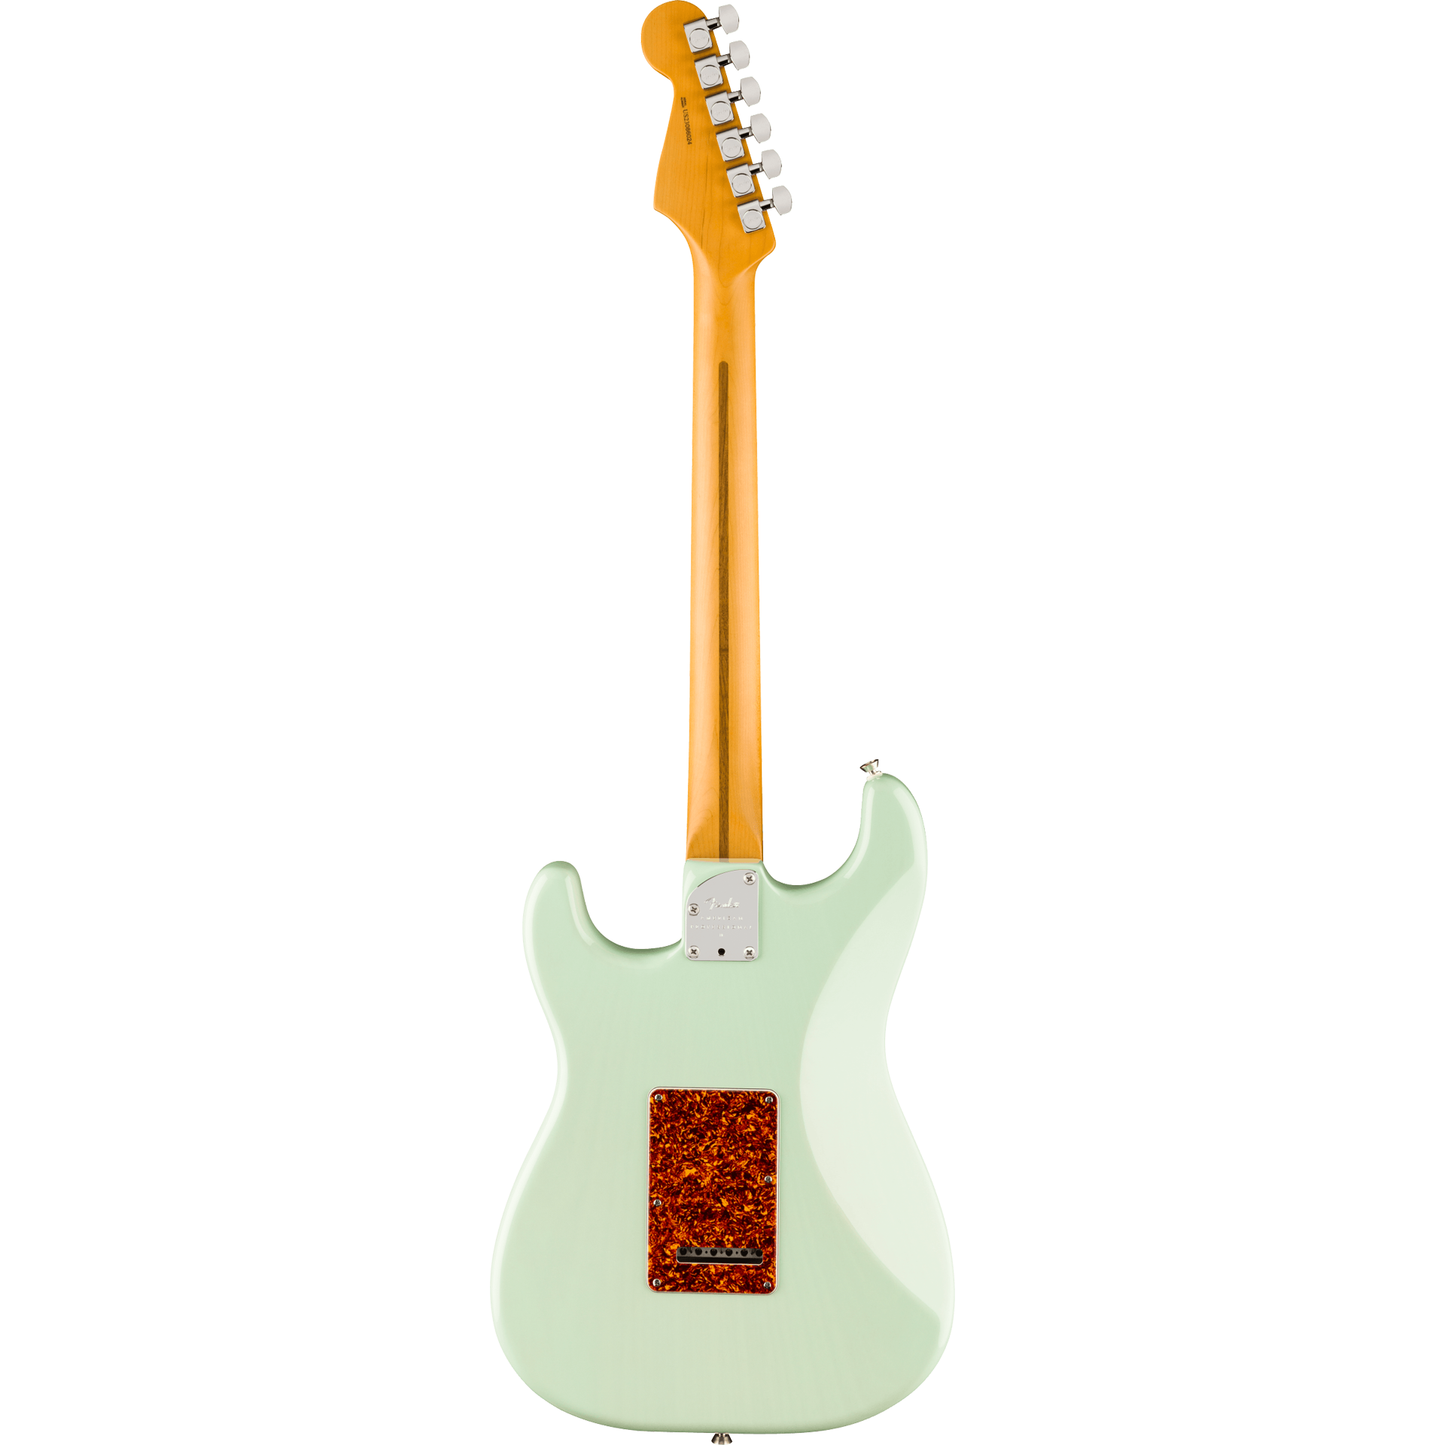 Fender American Professional II Stratocaster Thinline - Transparent Surf Green